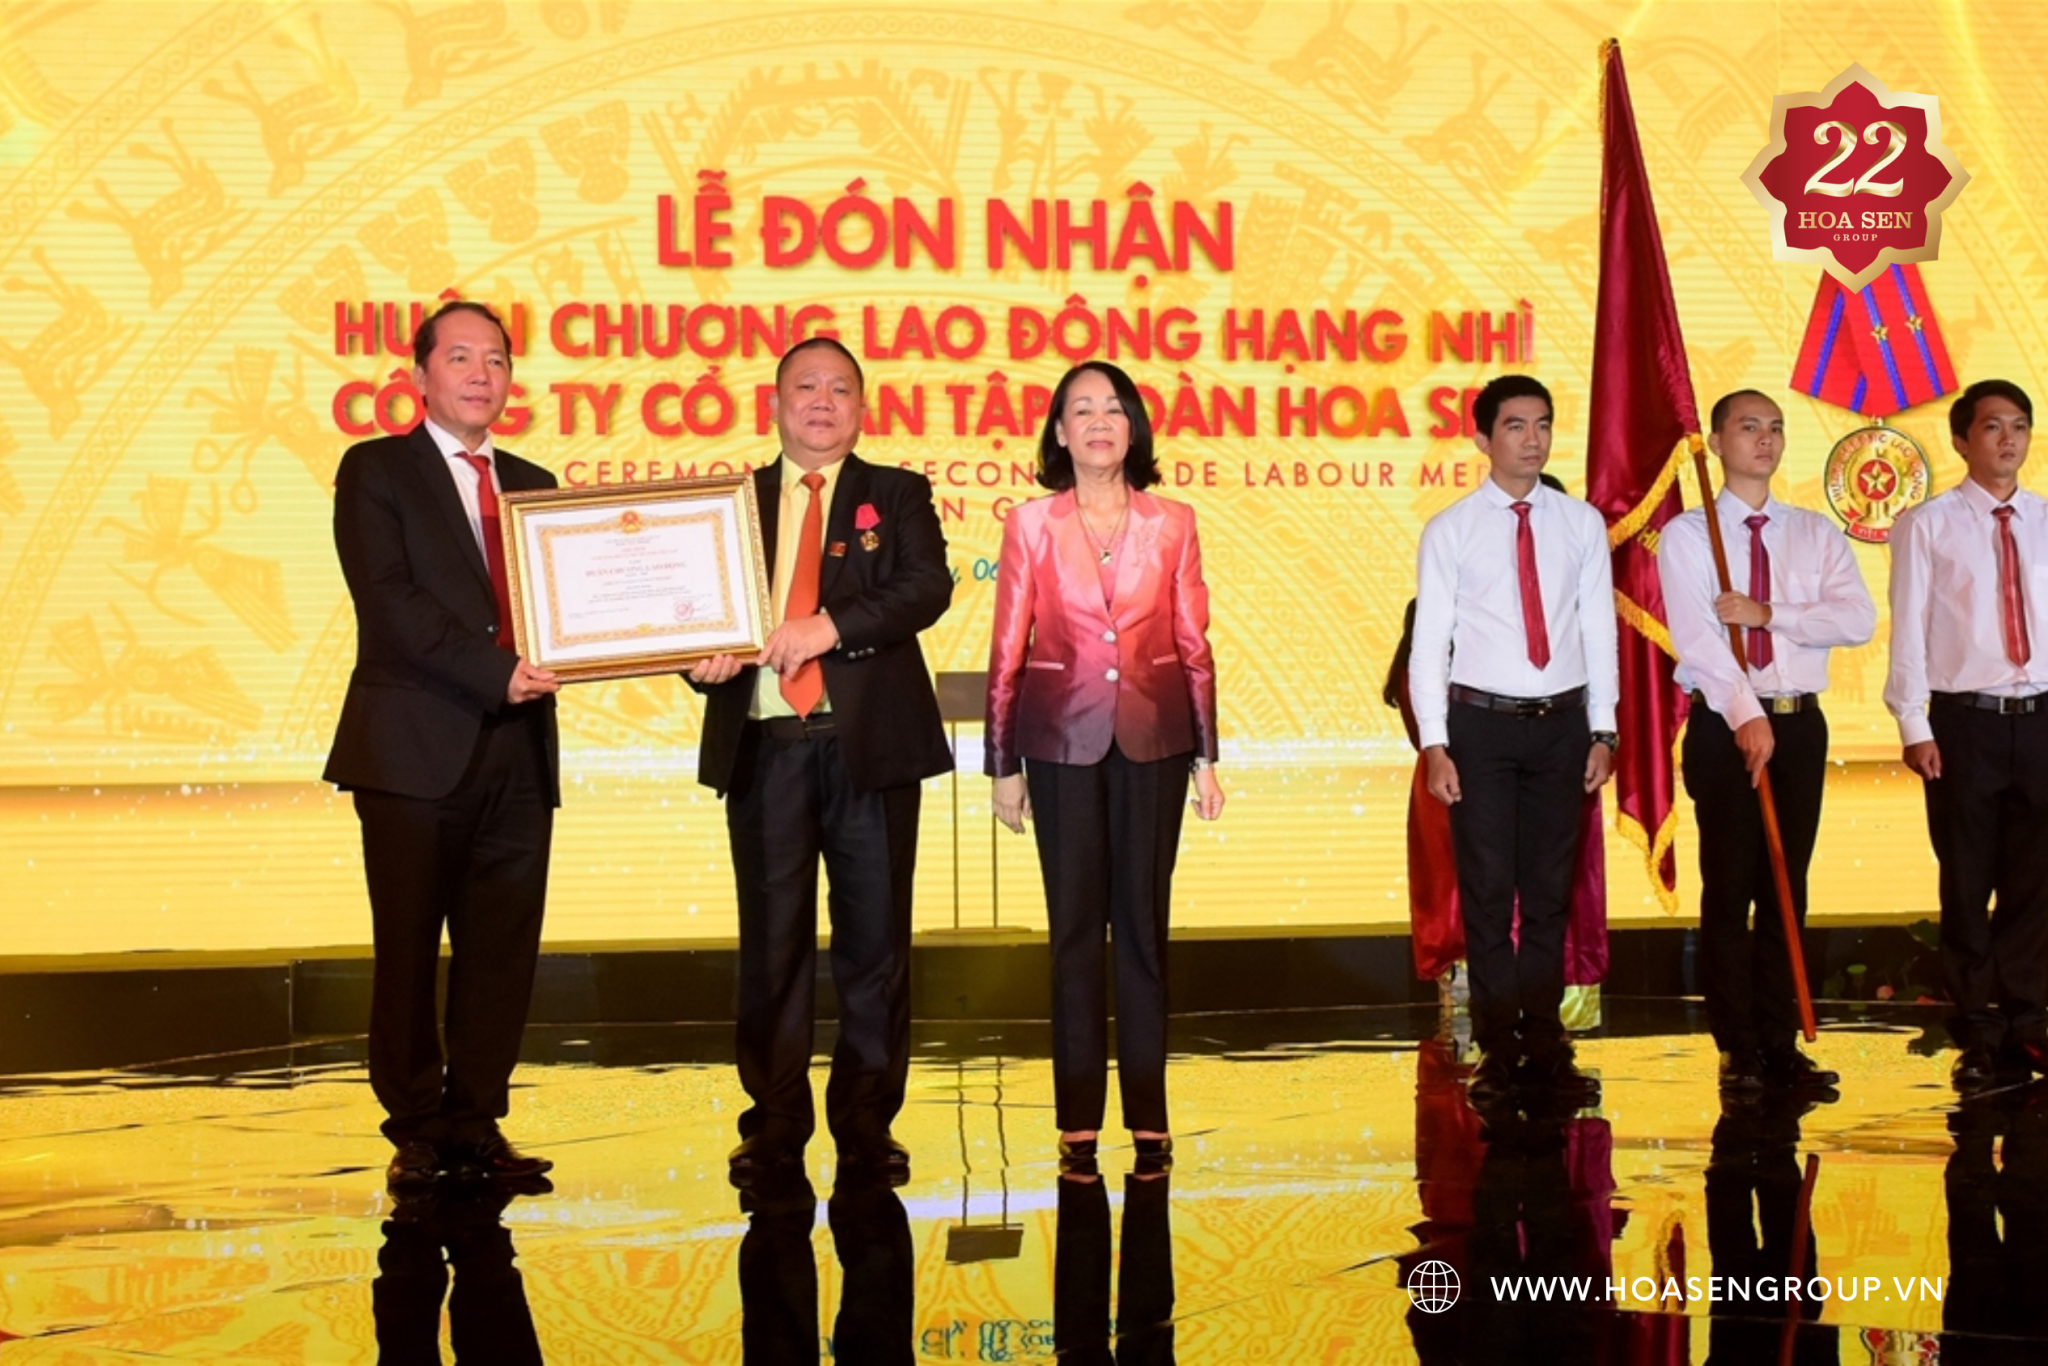 Hoa Sen Group is honored to receive the Second Class Labor Medal awarded by the President